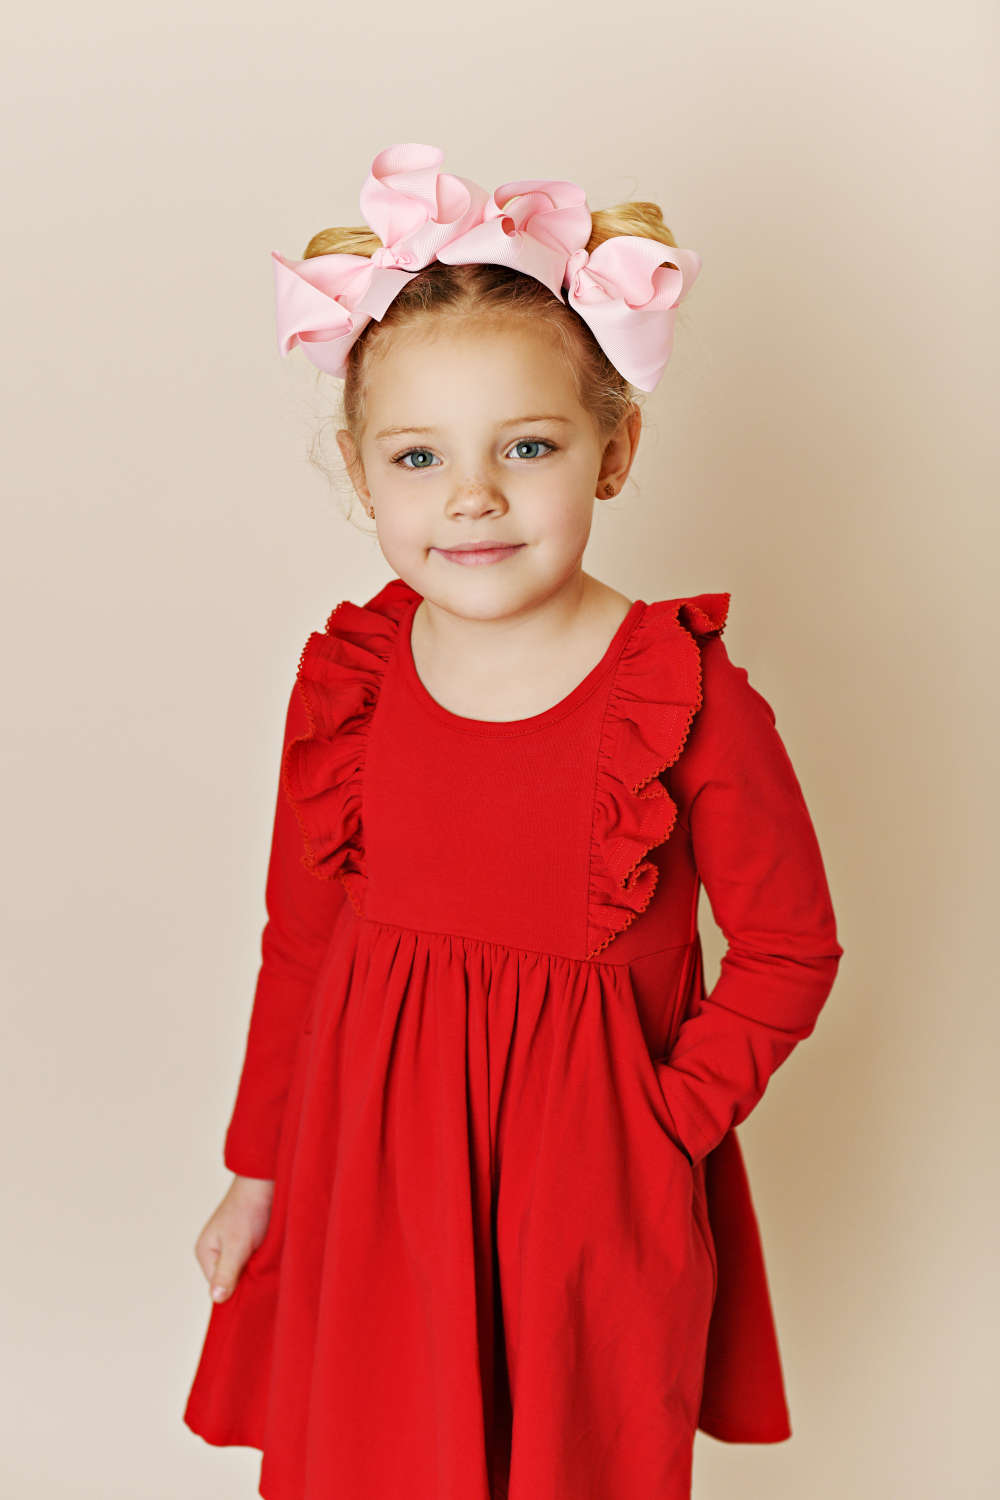 Swoon Baby Clothing Red Picot Pocket Bella Dress